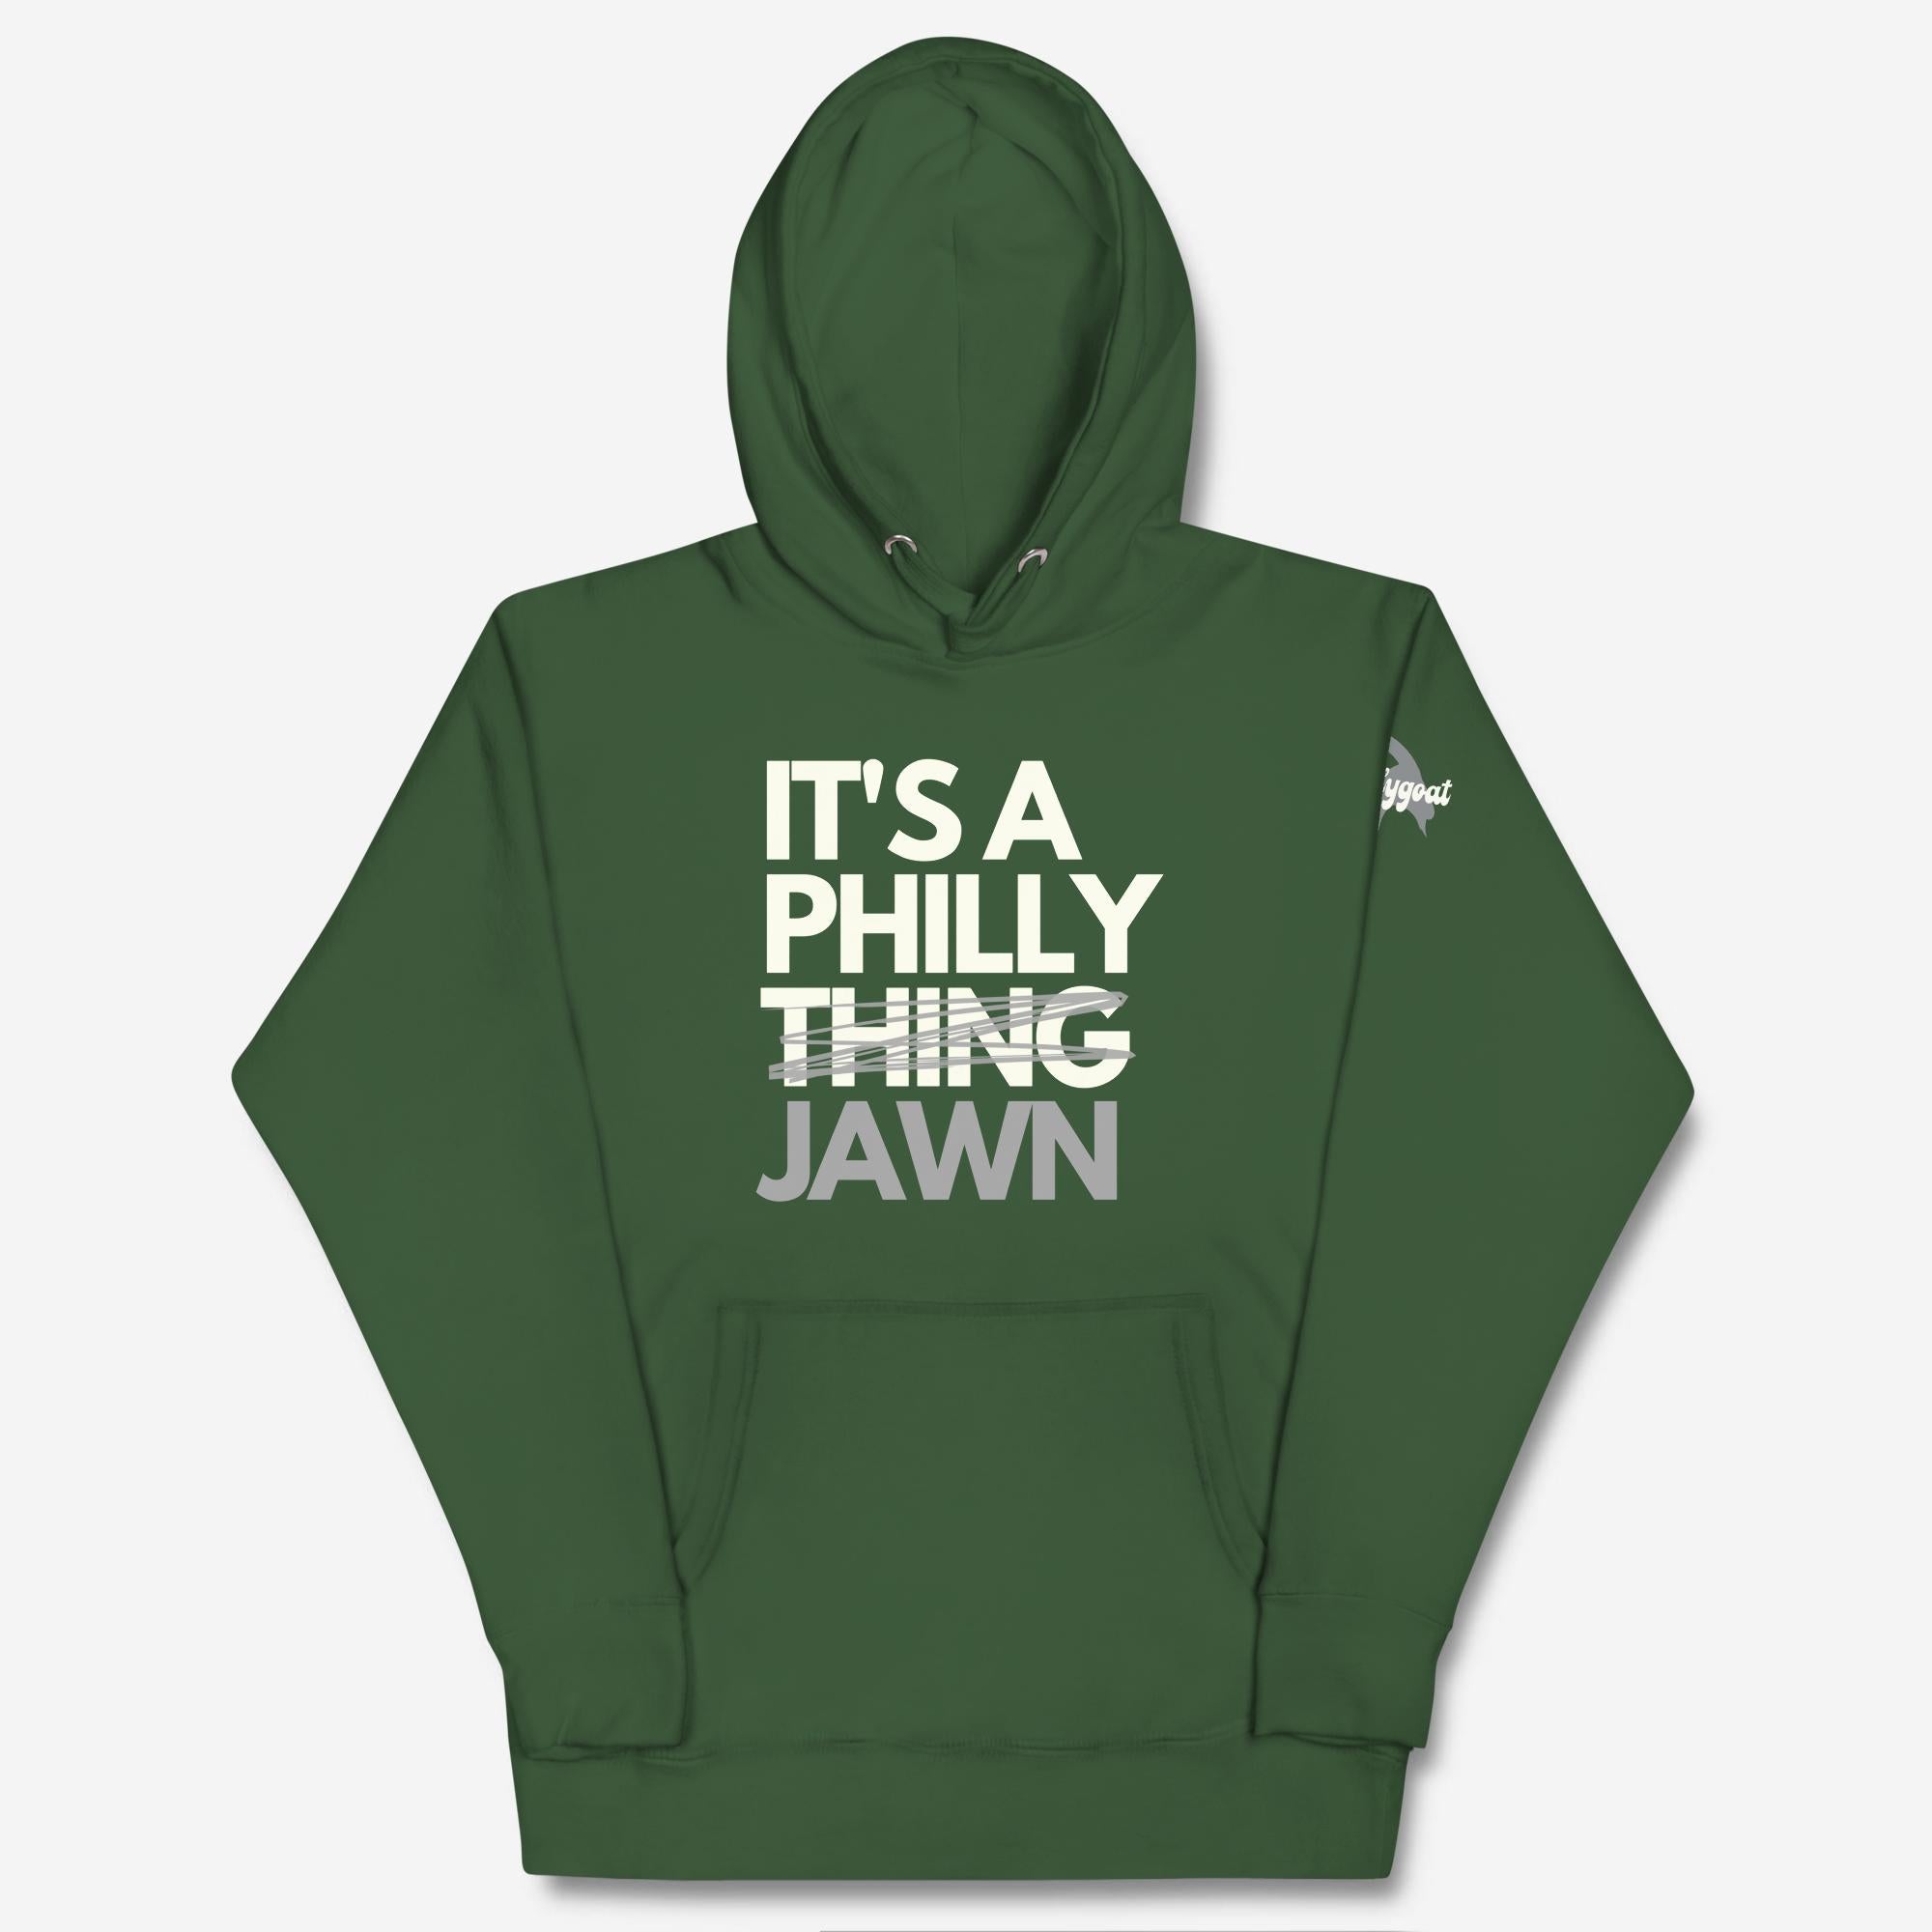 "It's a Philly Jawn" Hoodie